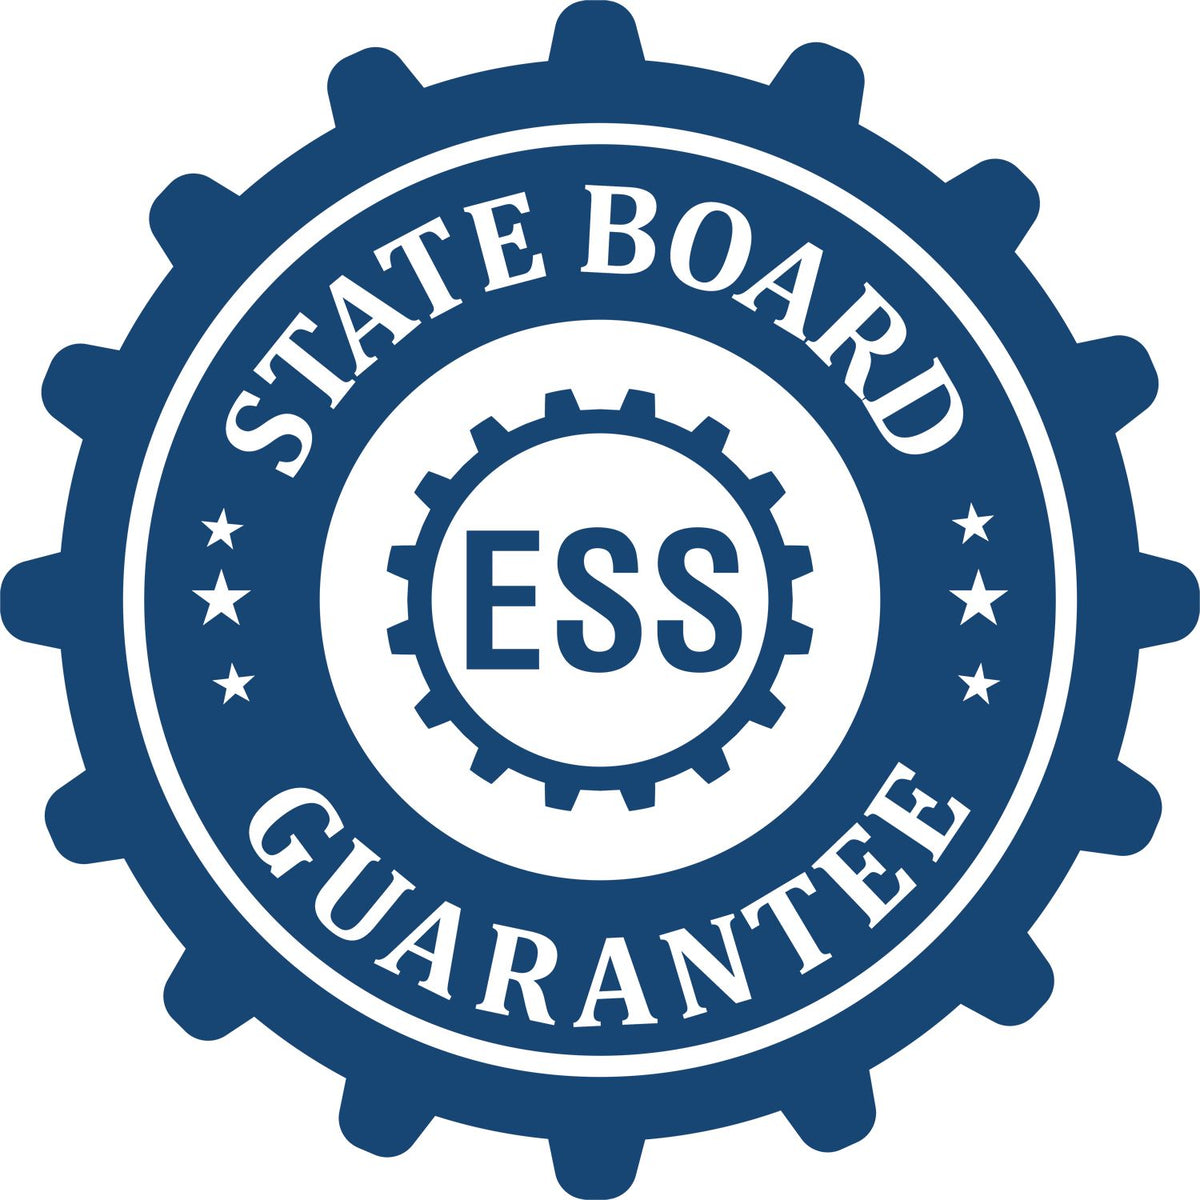 An emblem in a gear shape illustrating a state board guarantee for the Georgia Landscape Architectural Seal Stamp product.